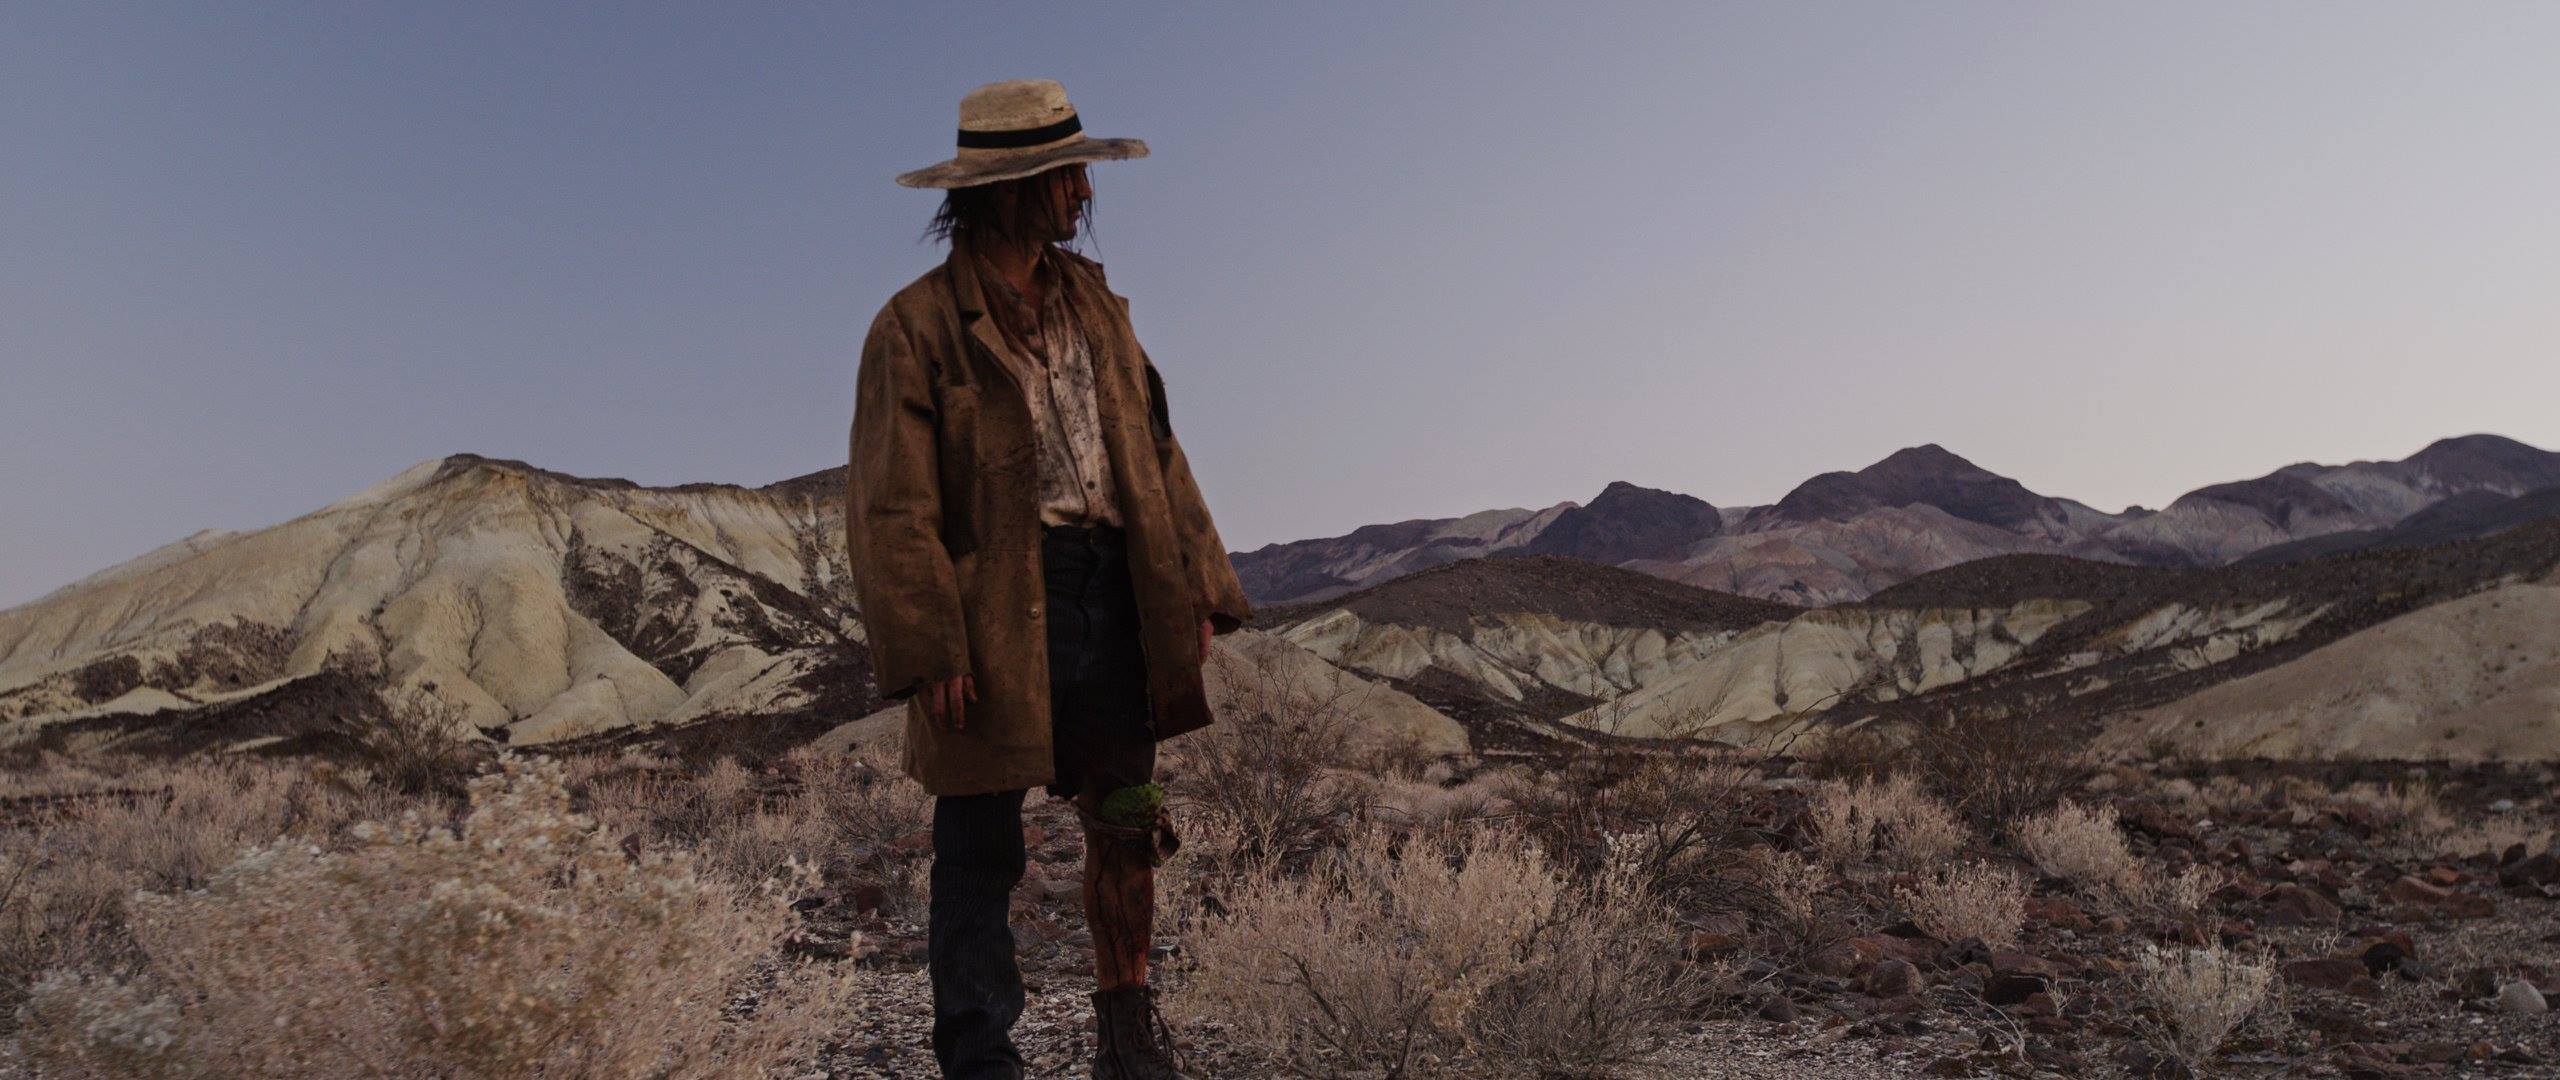 Michael O'Neal Actor - behind the scene still from the film, THE CROSSING; pic location: Death Valley